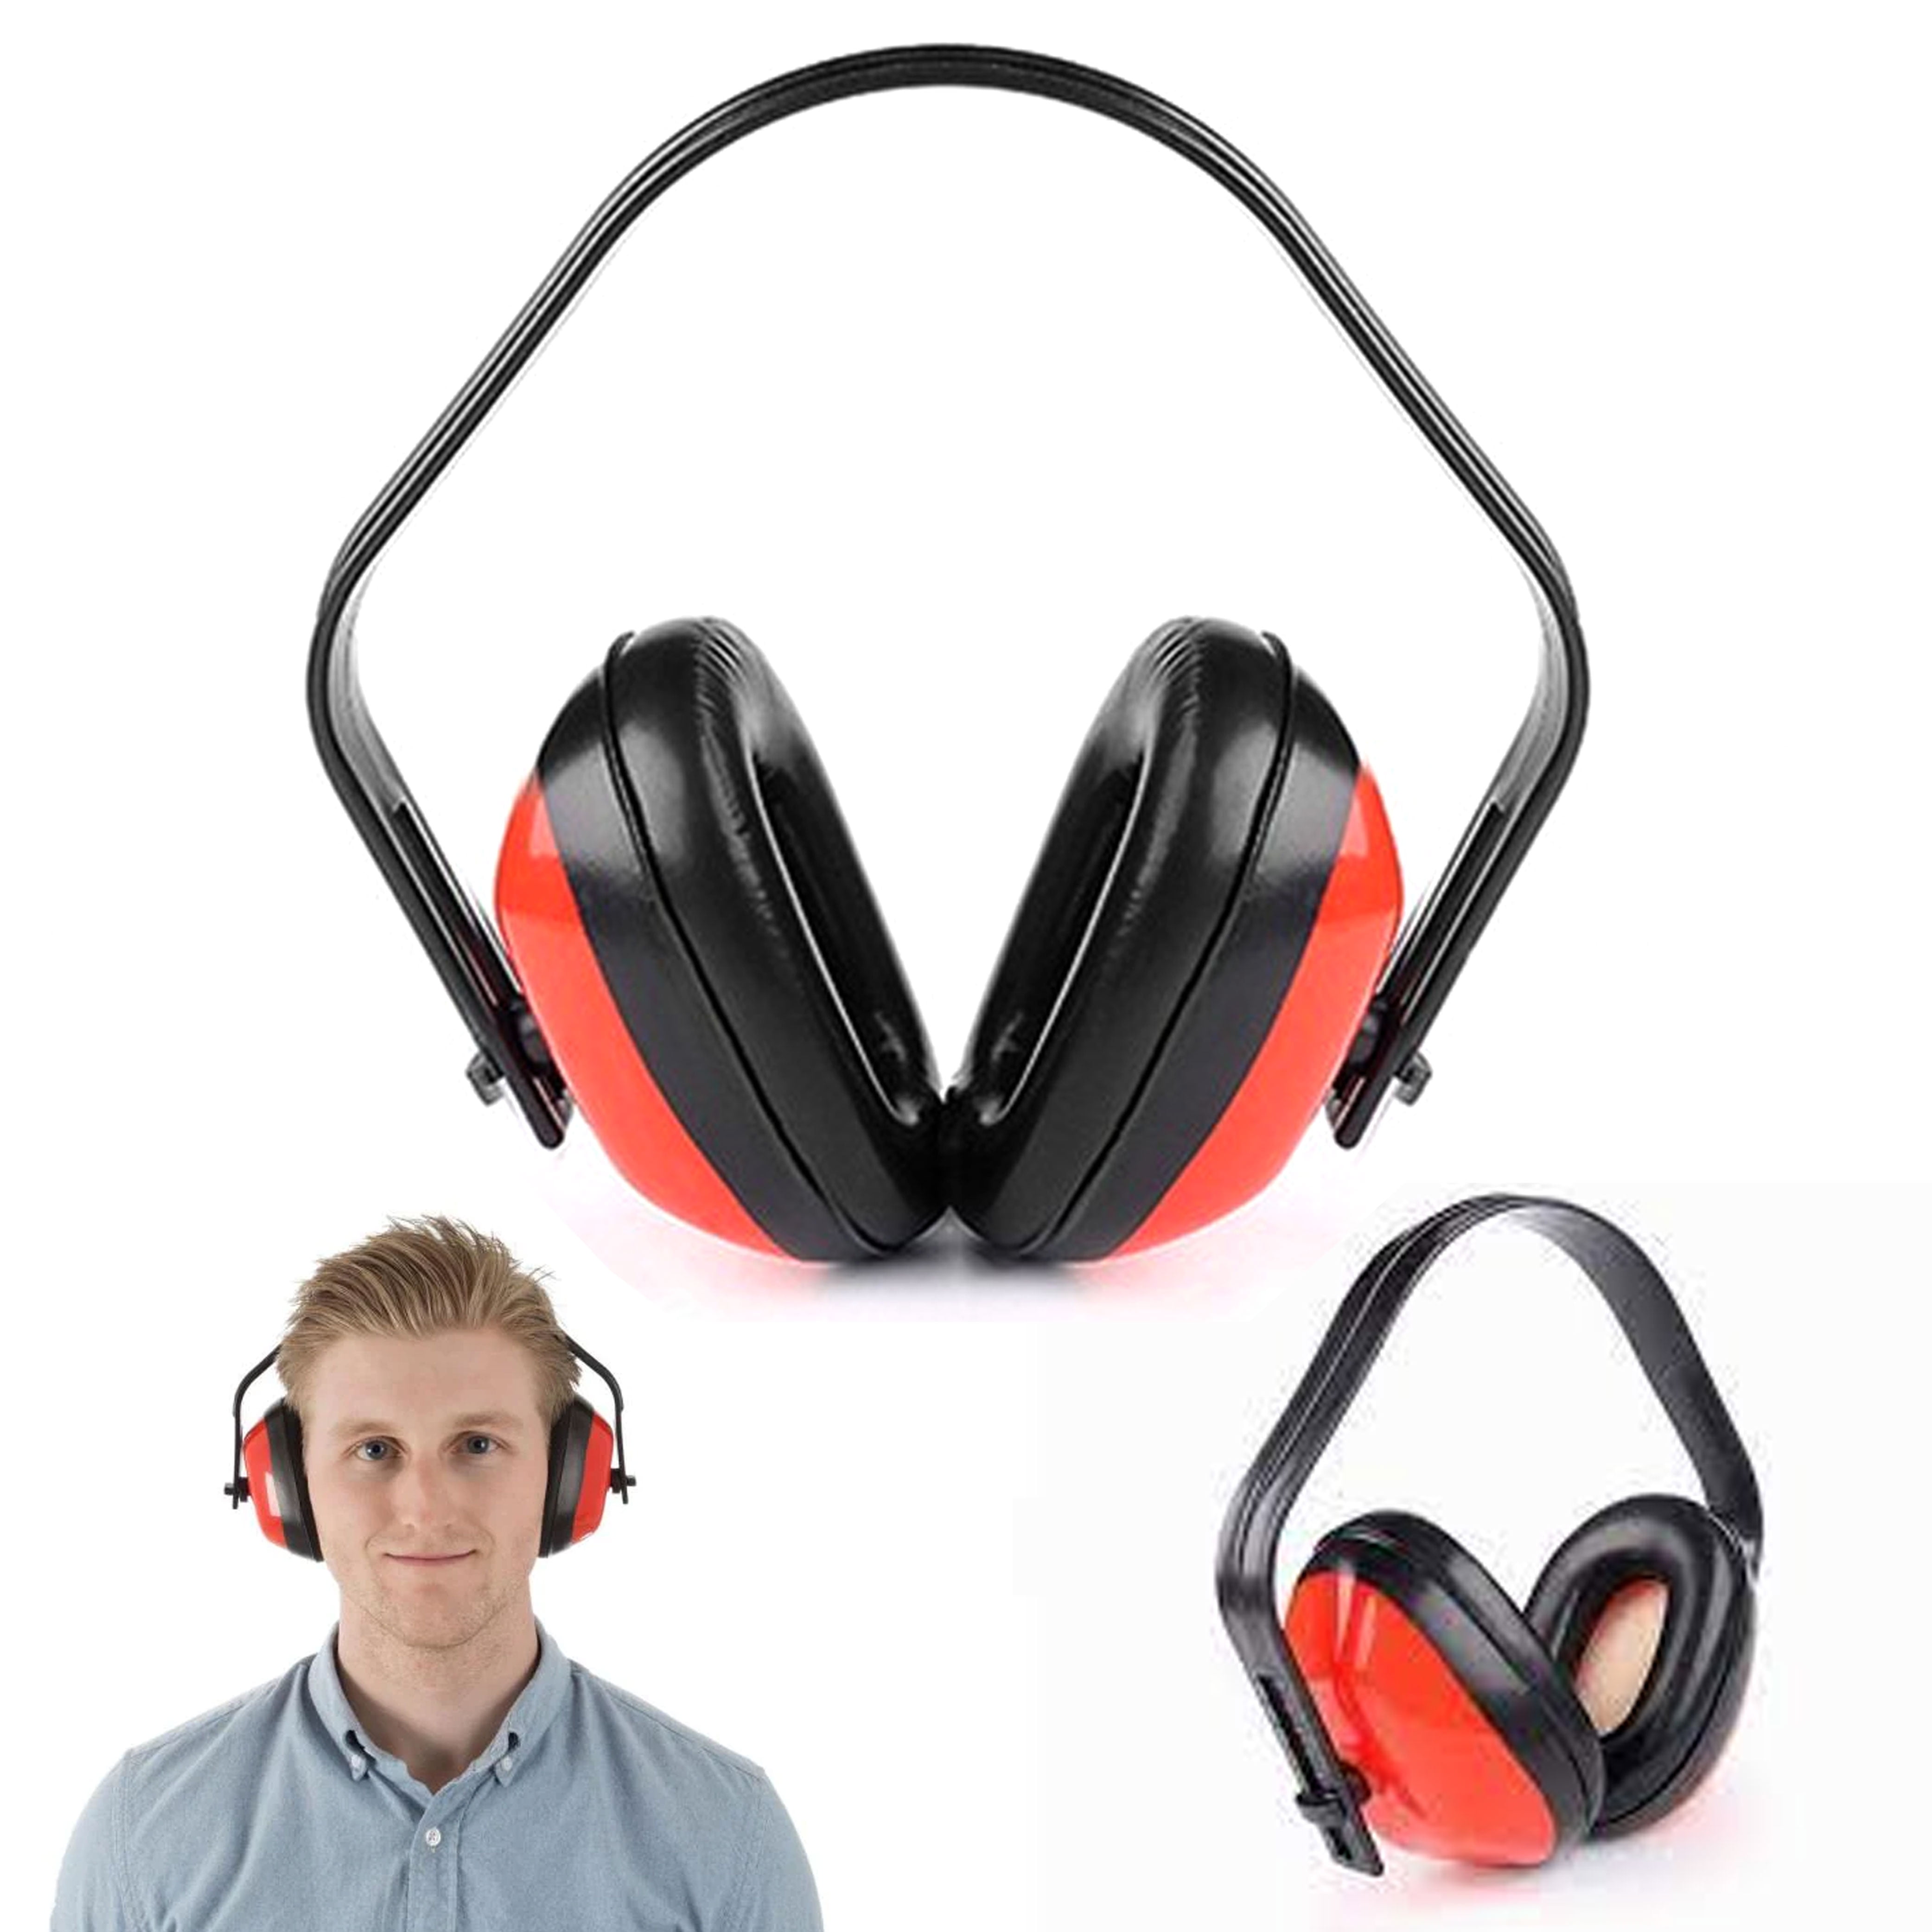 Ear Muffs Foldable Noise Reduction Hearing Protection For Gun Shooting Range 